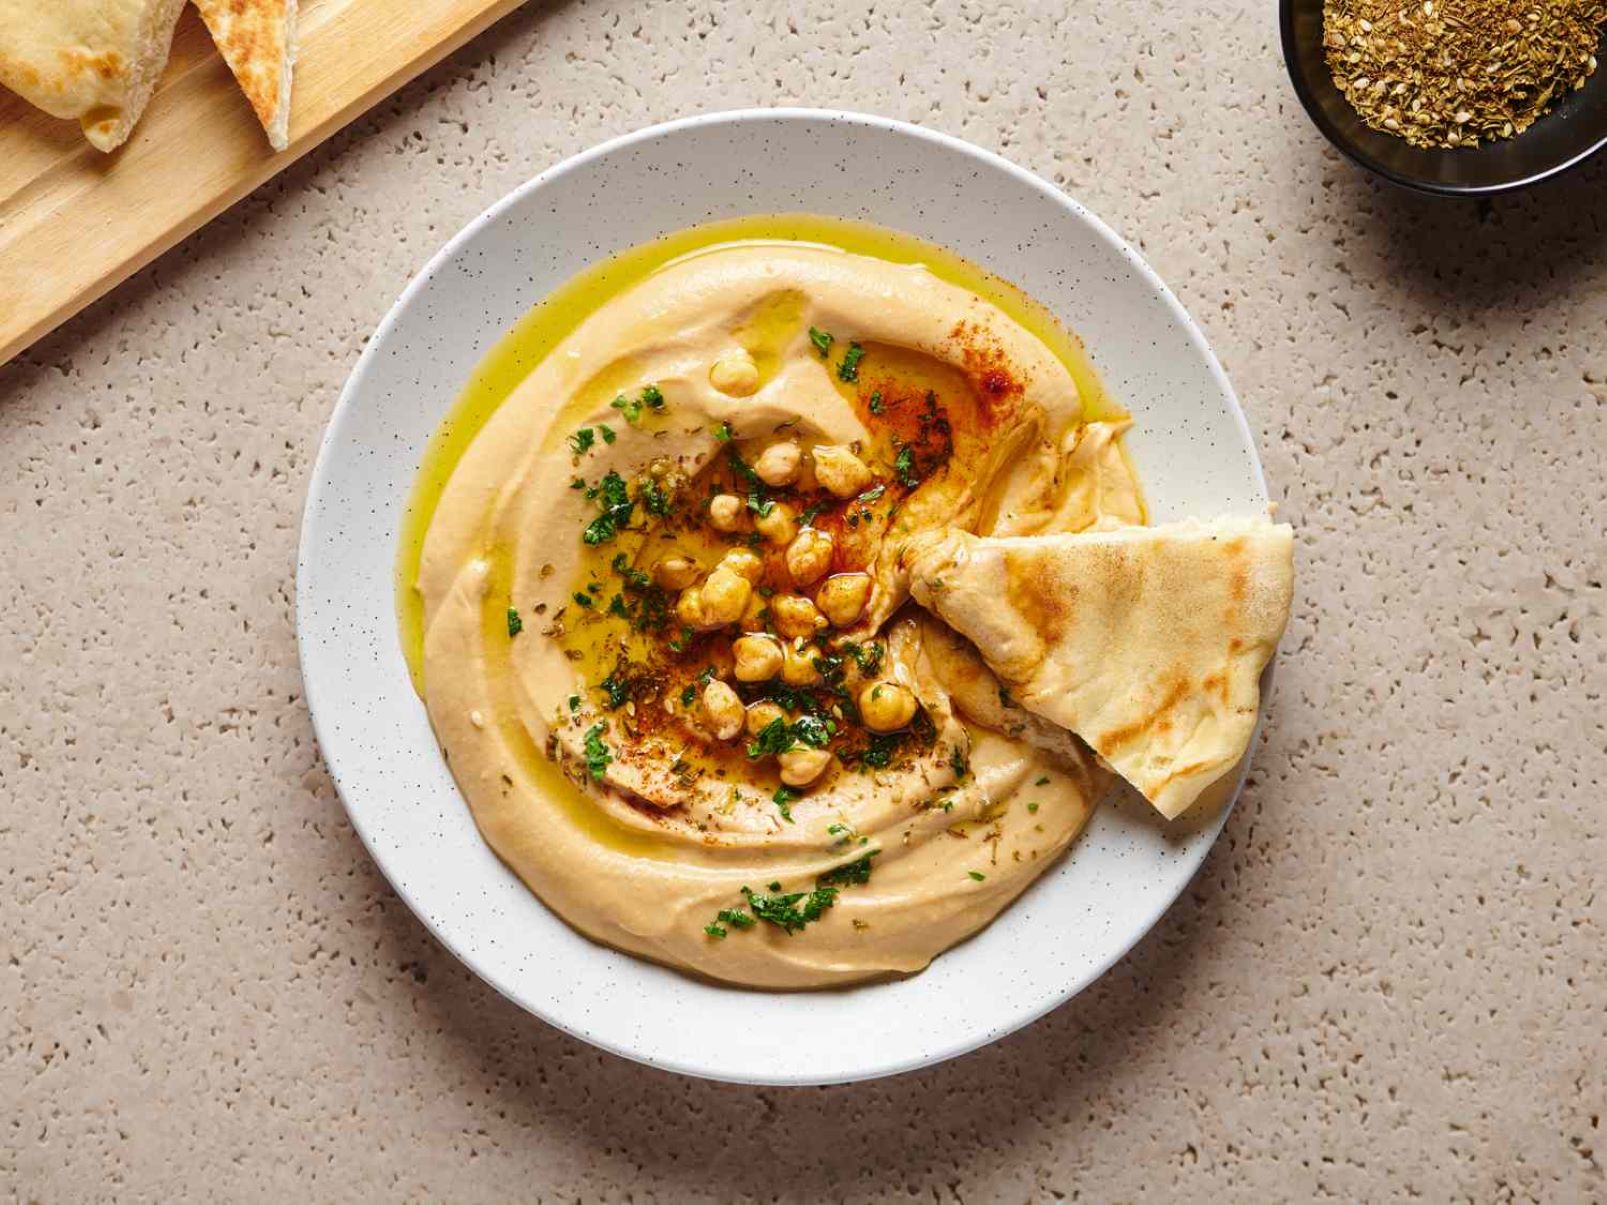 The Ultimate Guide To Storing And Extending The Shelf Life Of Store-Bought Hummus